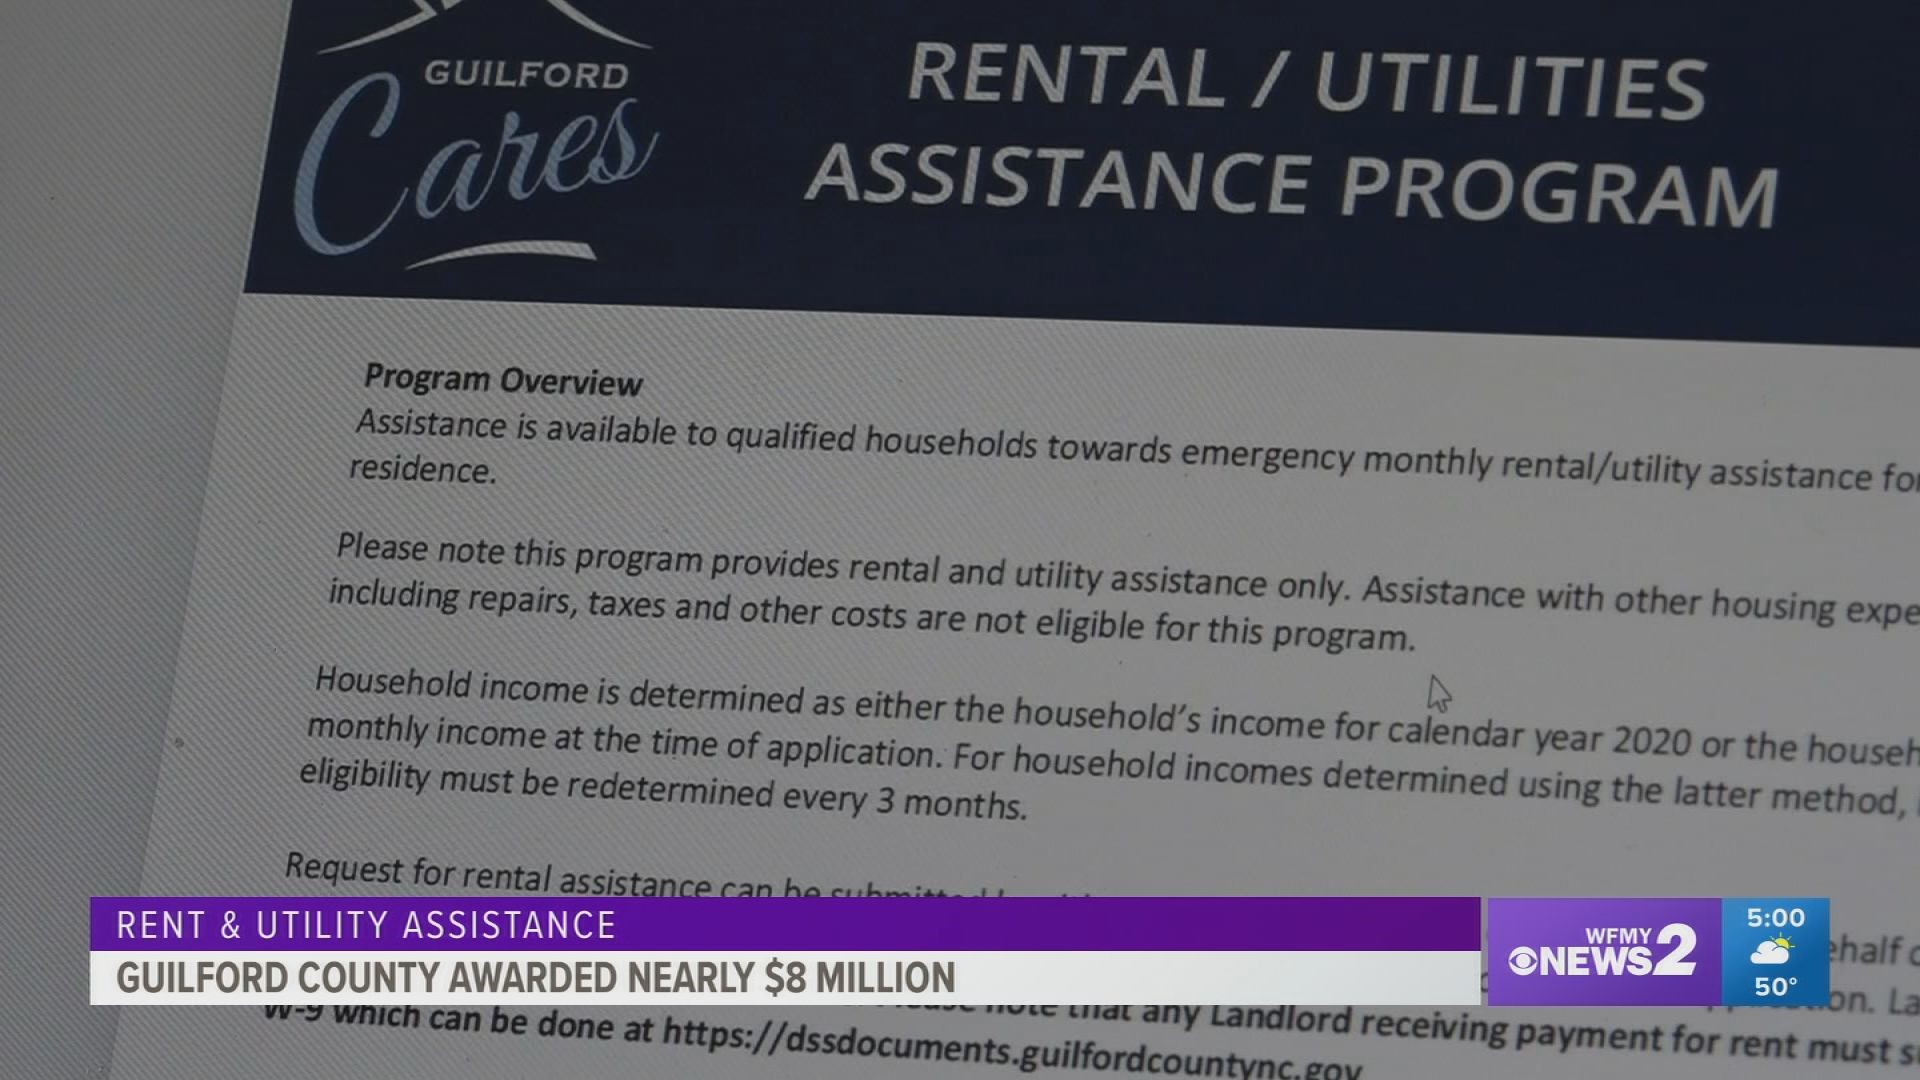 Monday, Guilford County launched its new rent and utility assistance program, offering $8 million in aid.